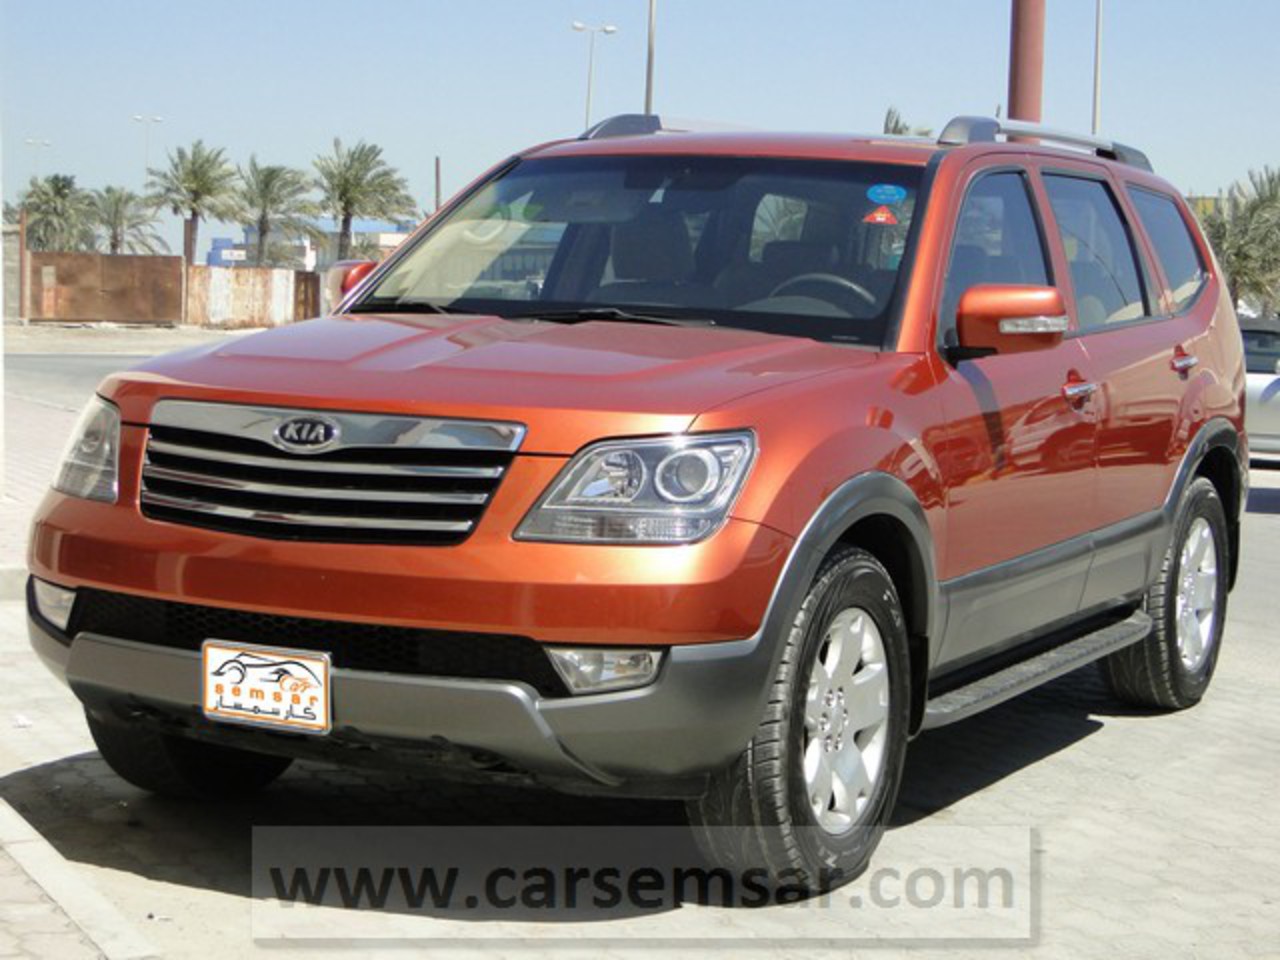 2009 Kia Mohave EX for Sale in Bahrain - New and Used Cars for ...